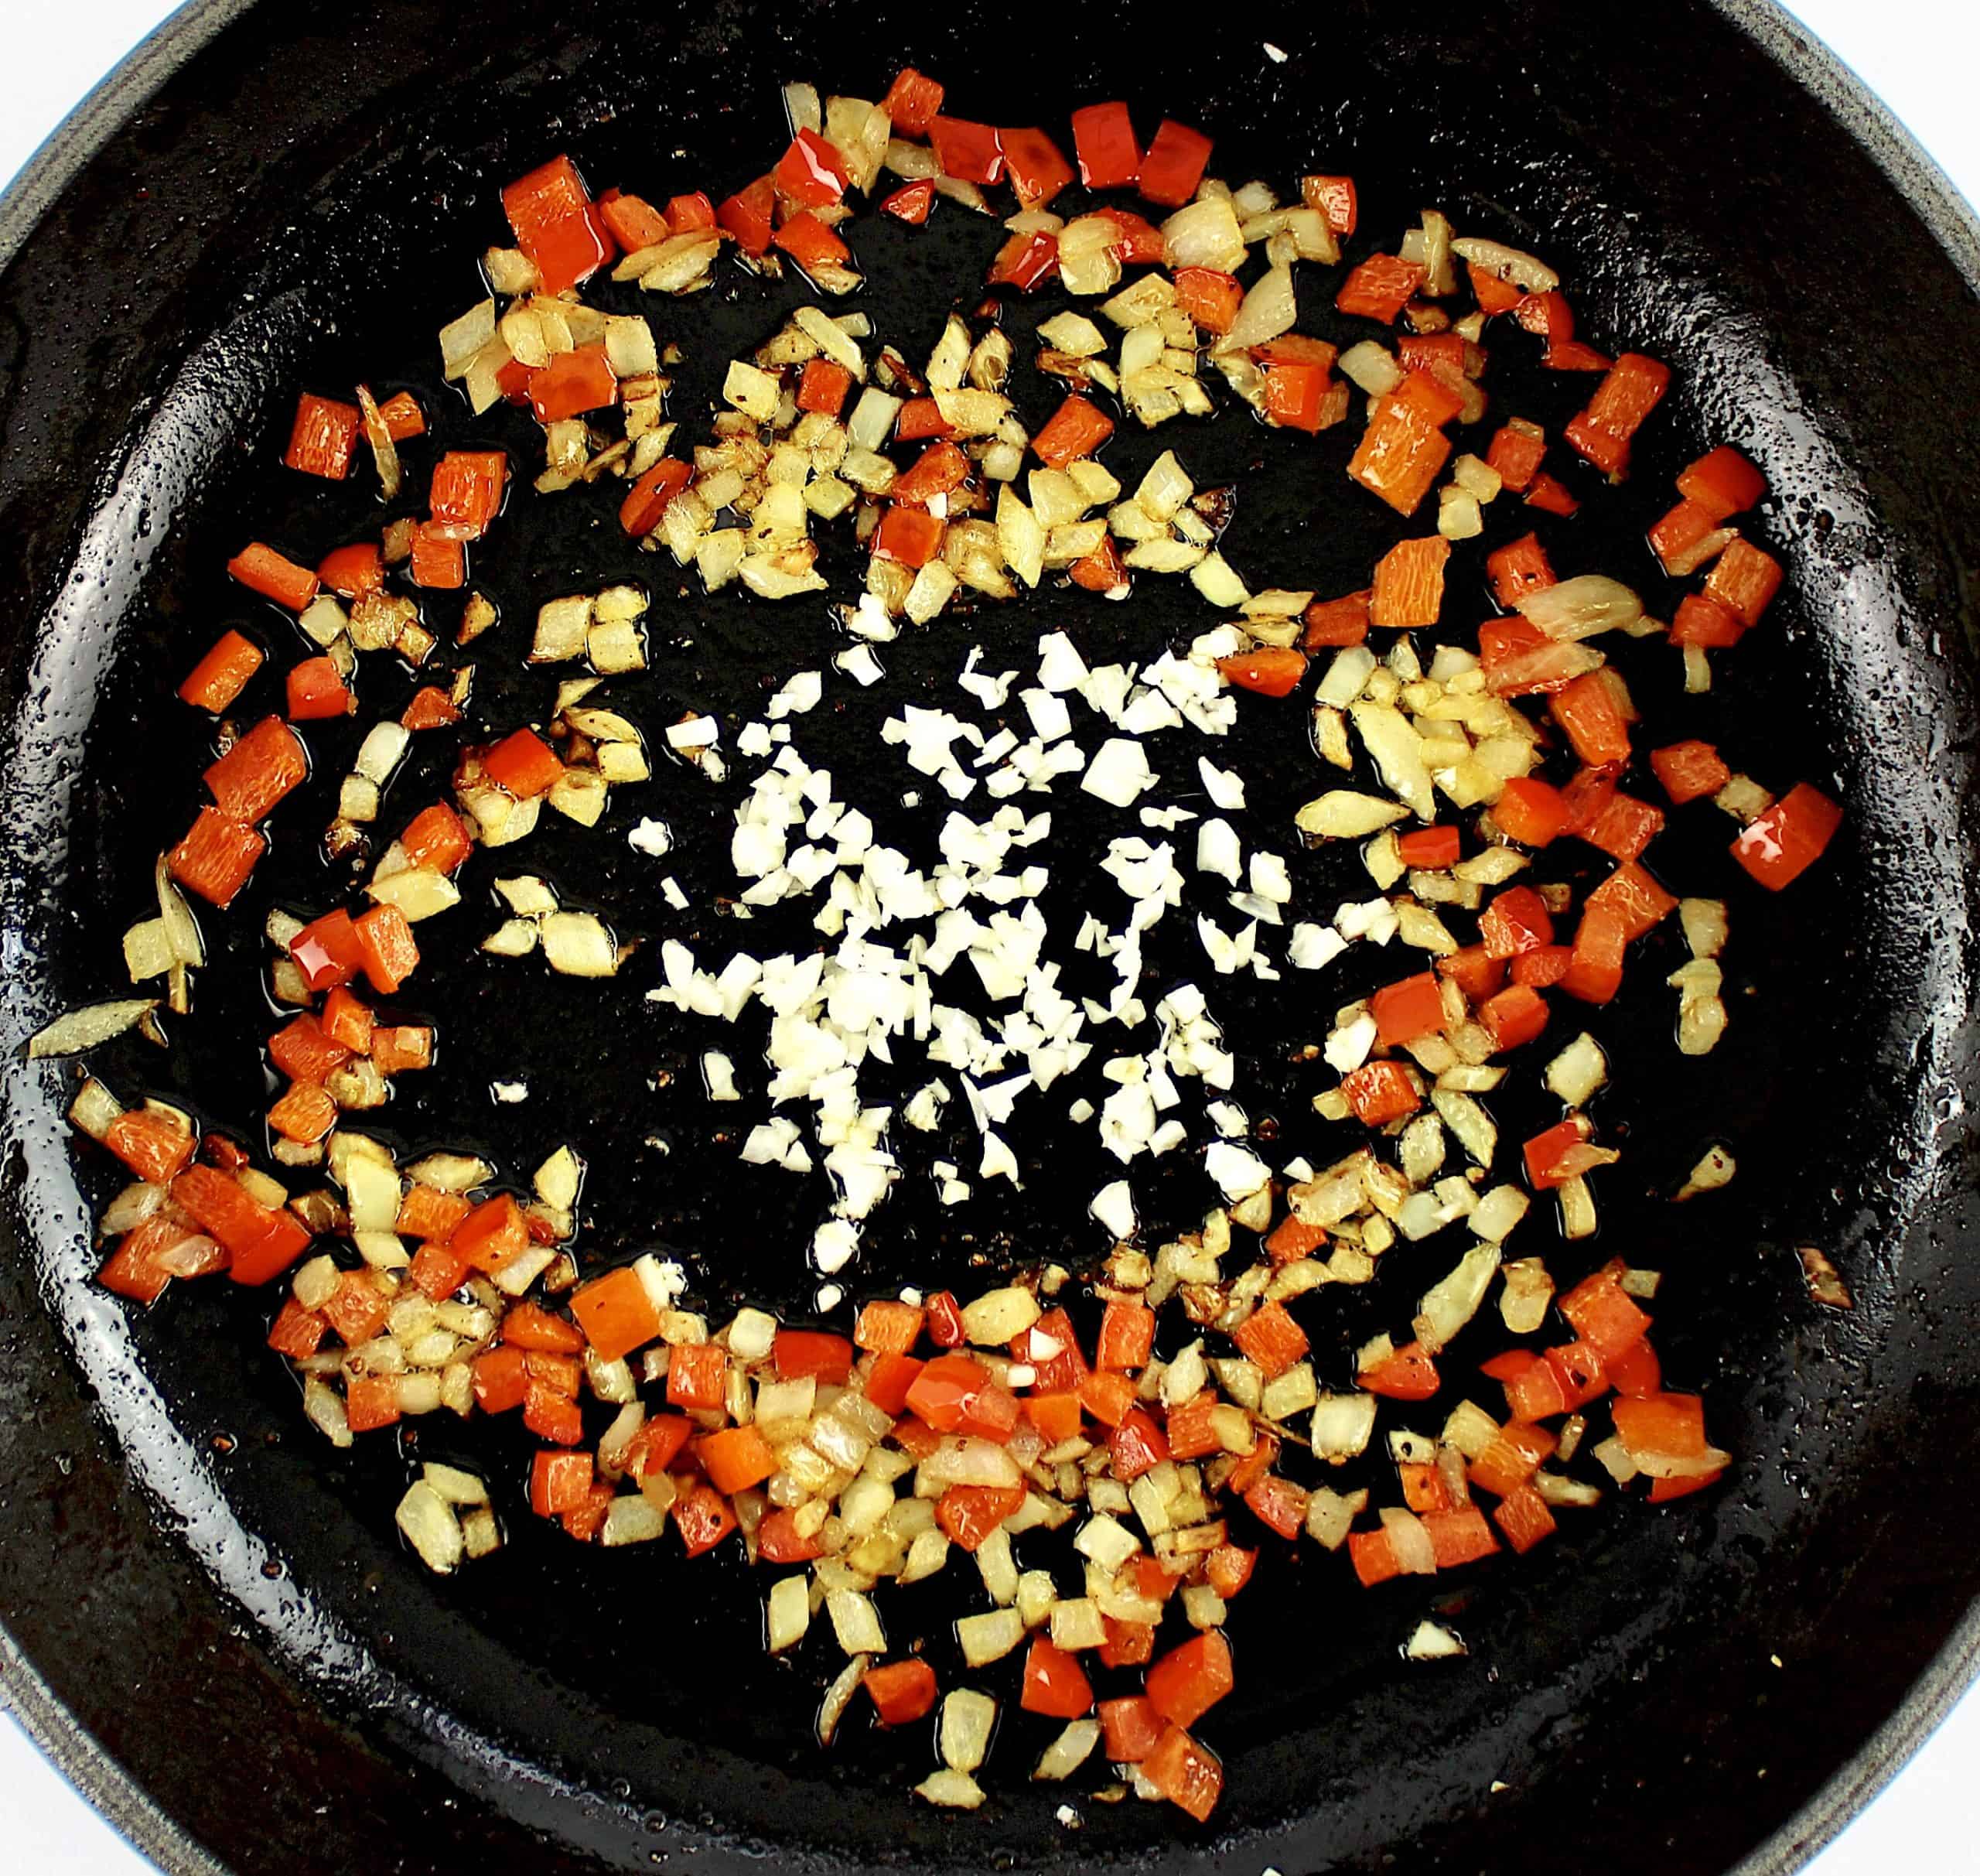 diced peppers, garlic and onions cooking in skillet